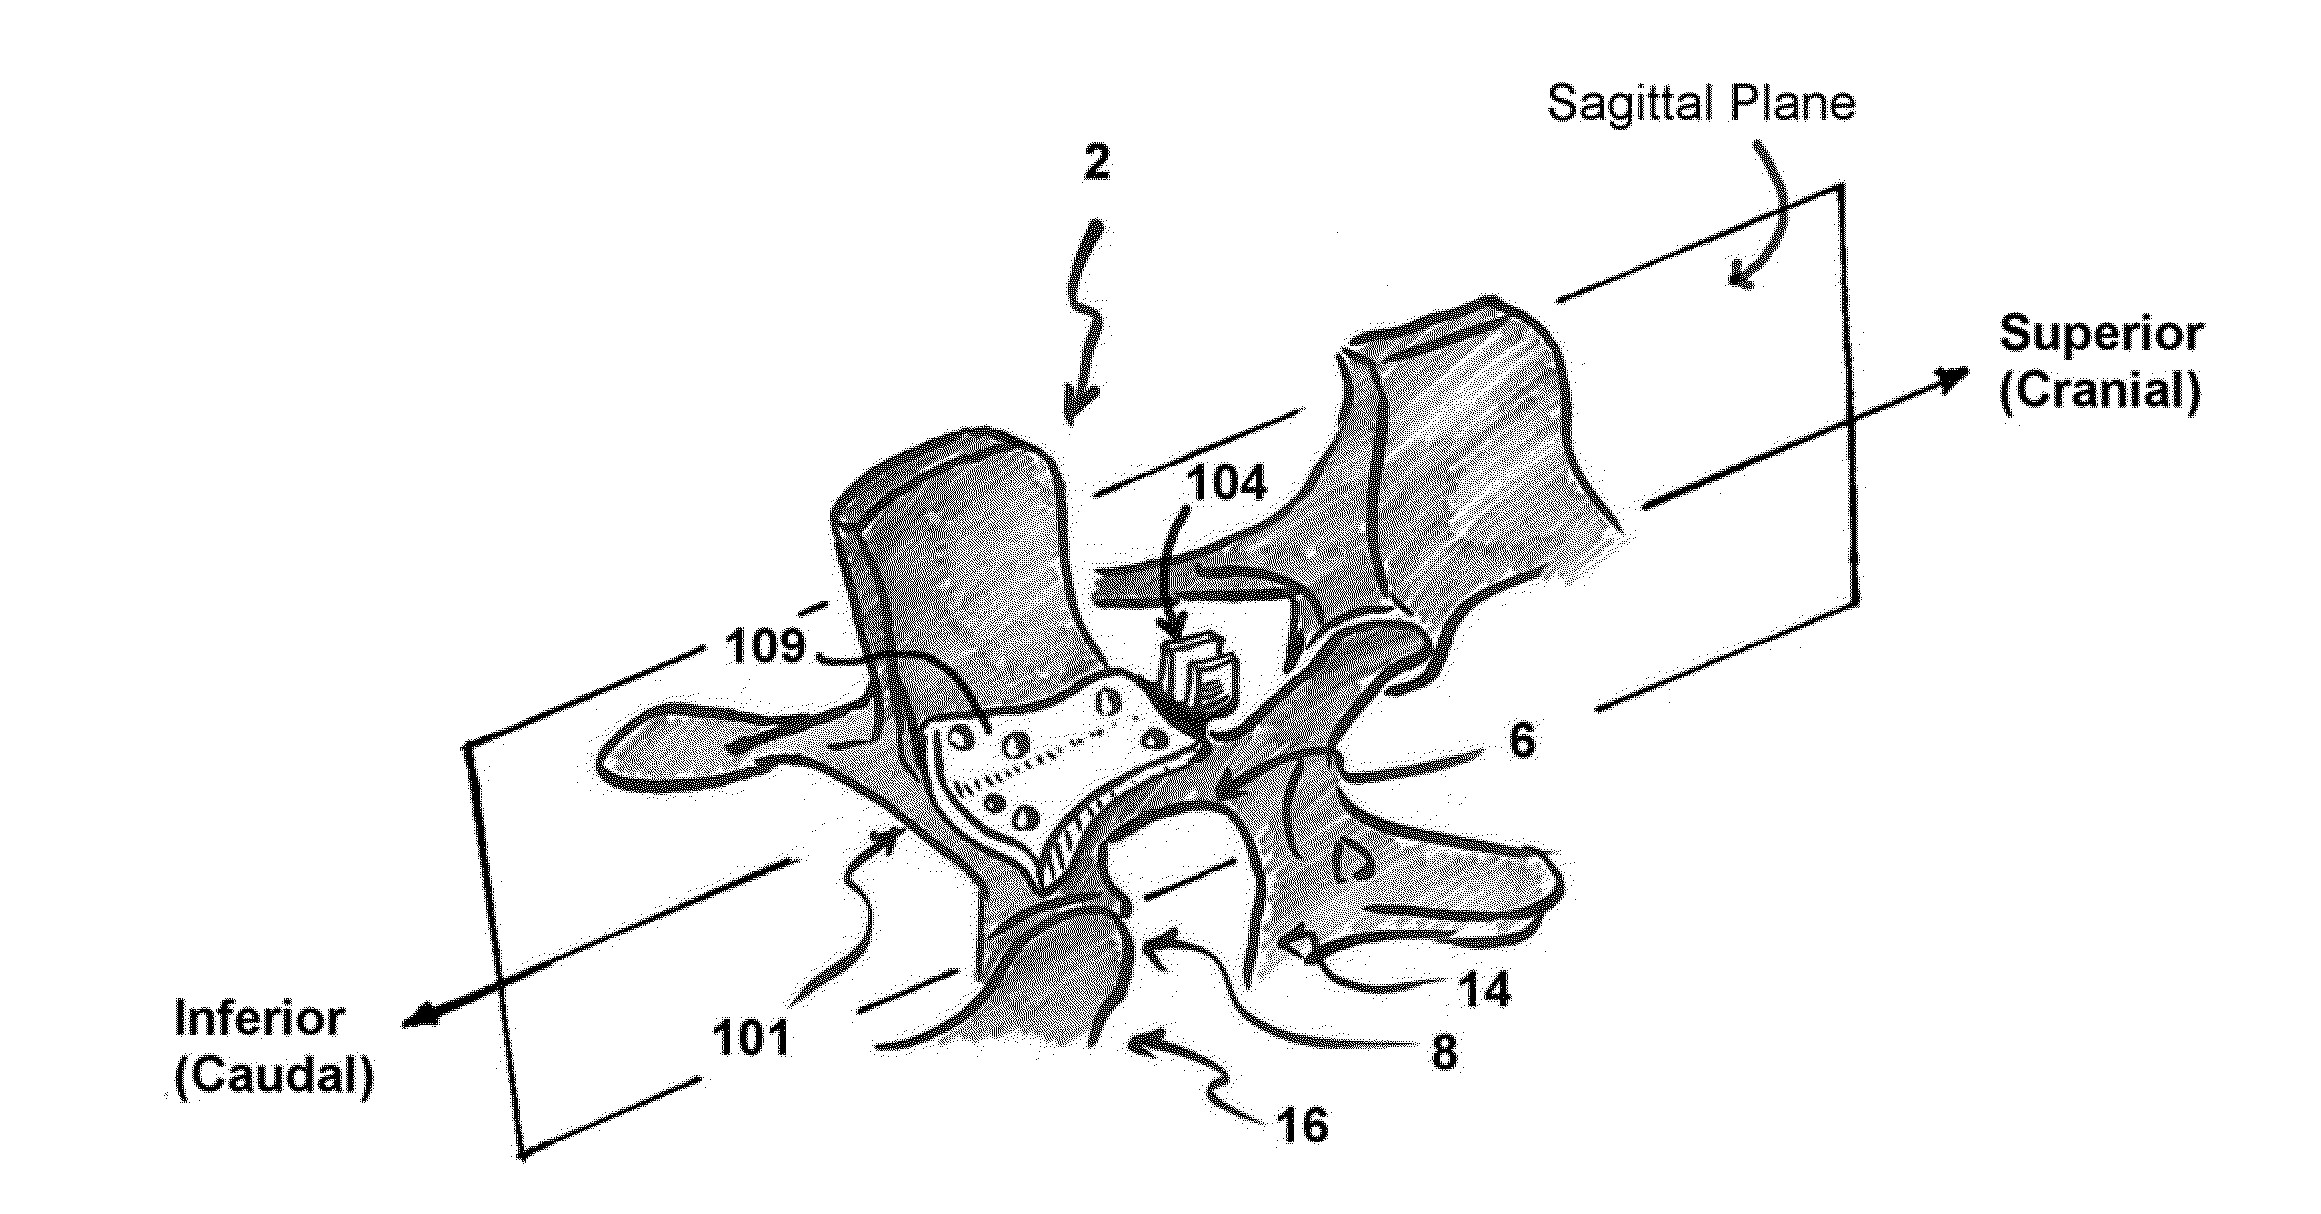 System and method to stablize a spinal column including a spinolaminar locking plate